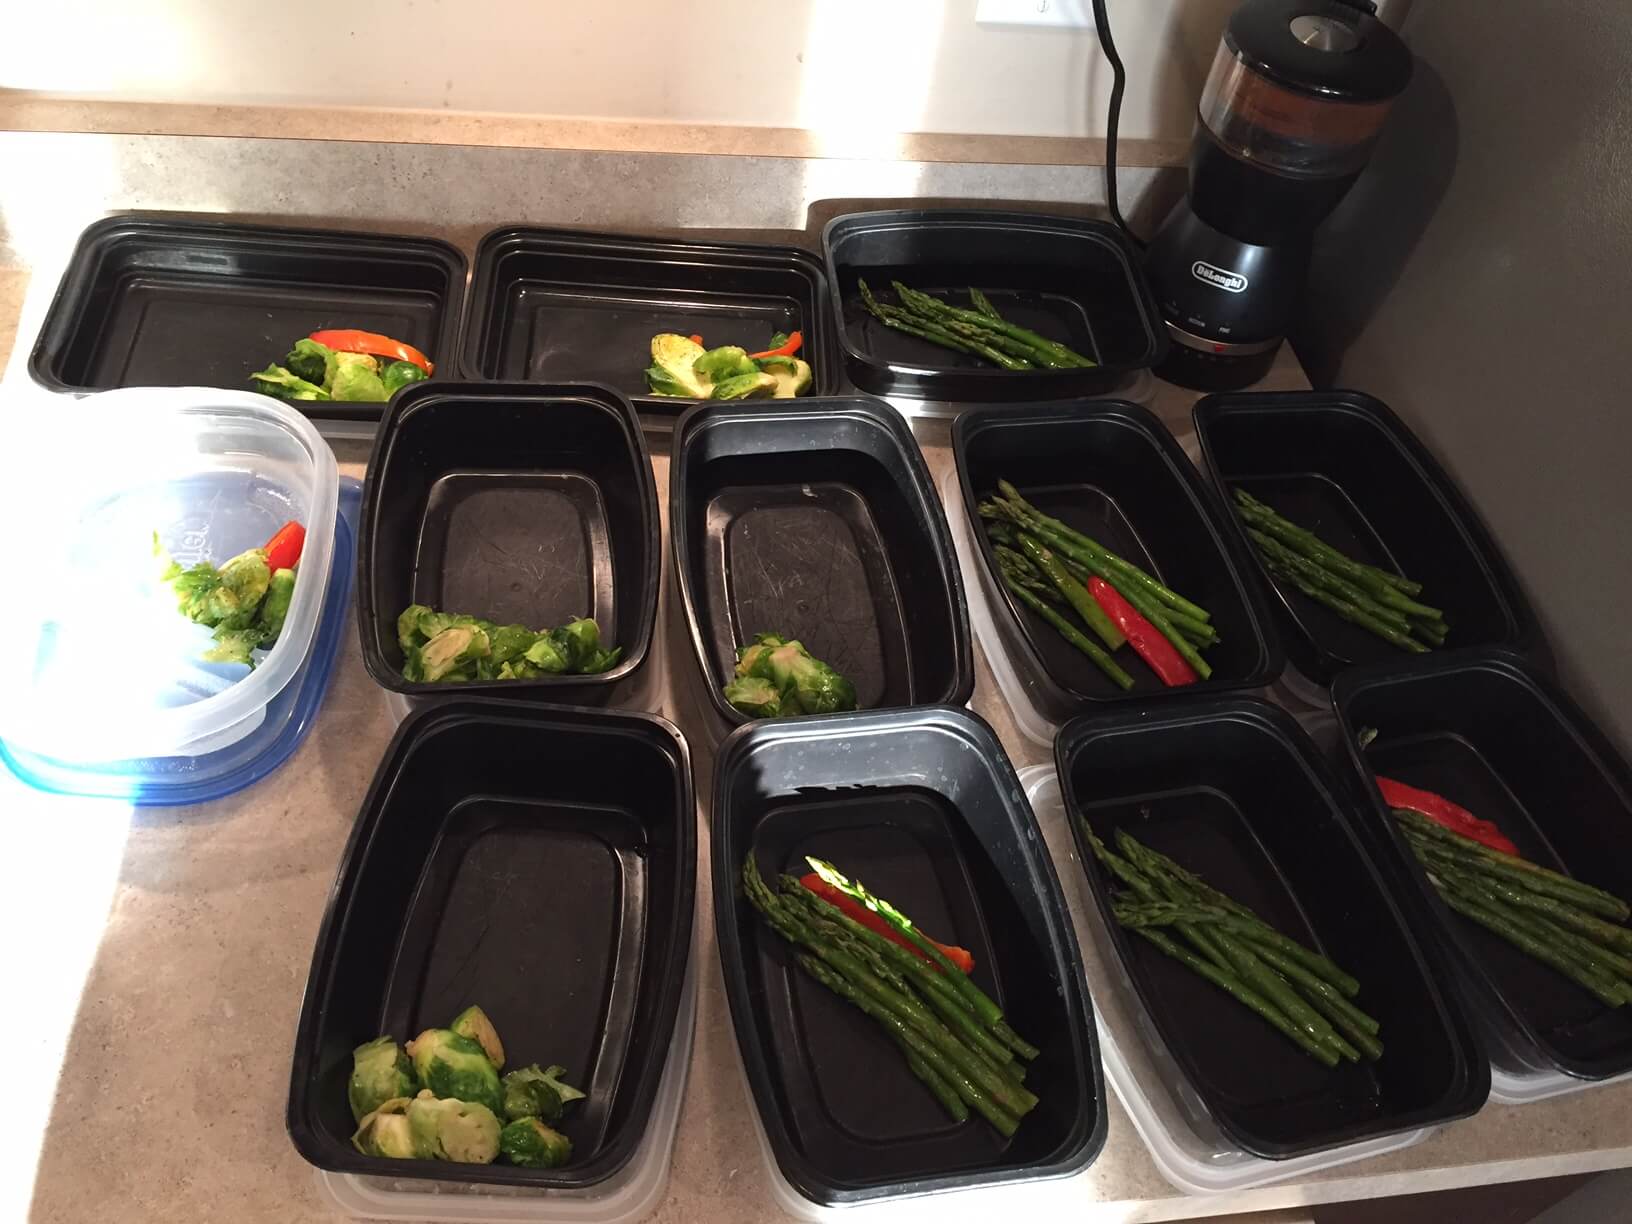 Veggies in Containers